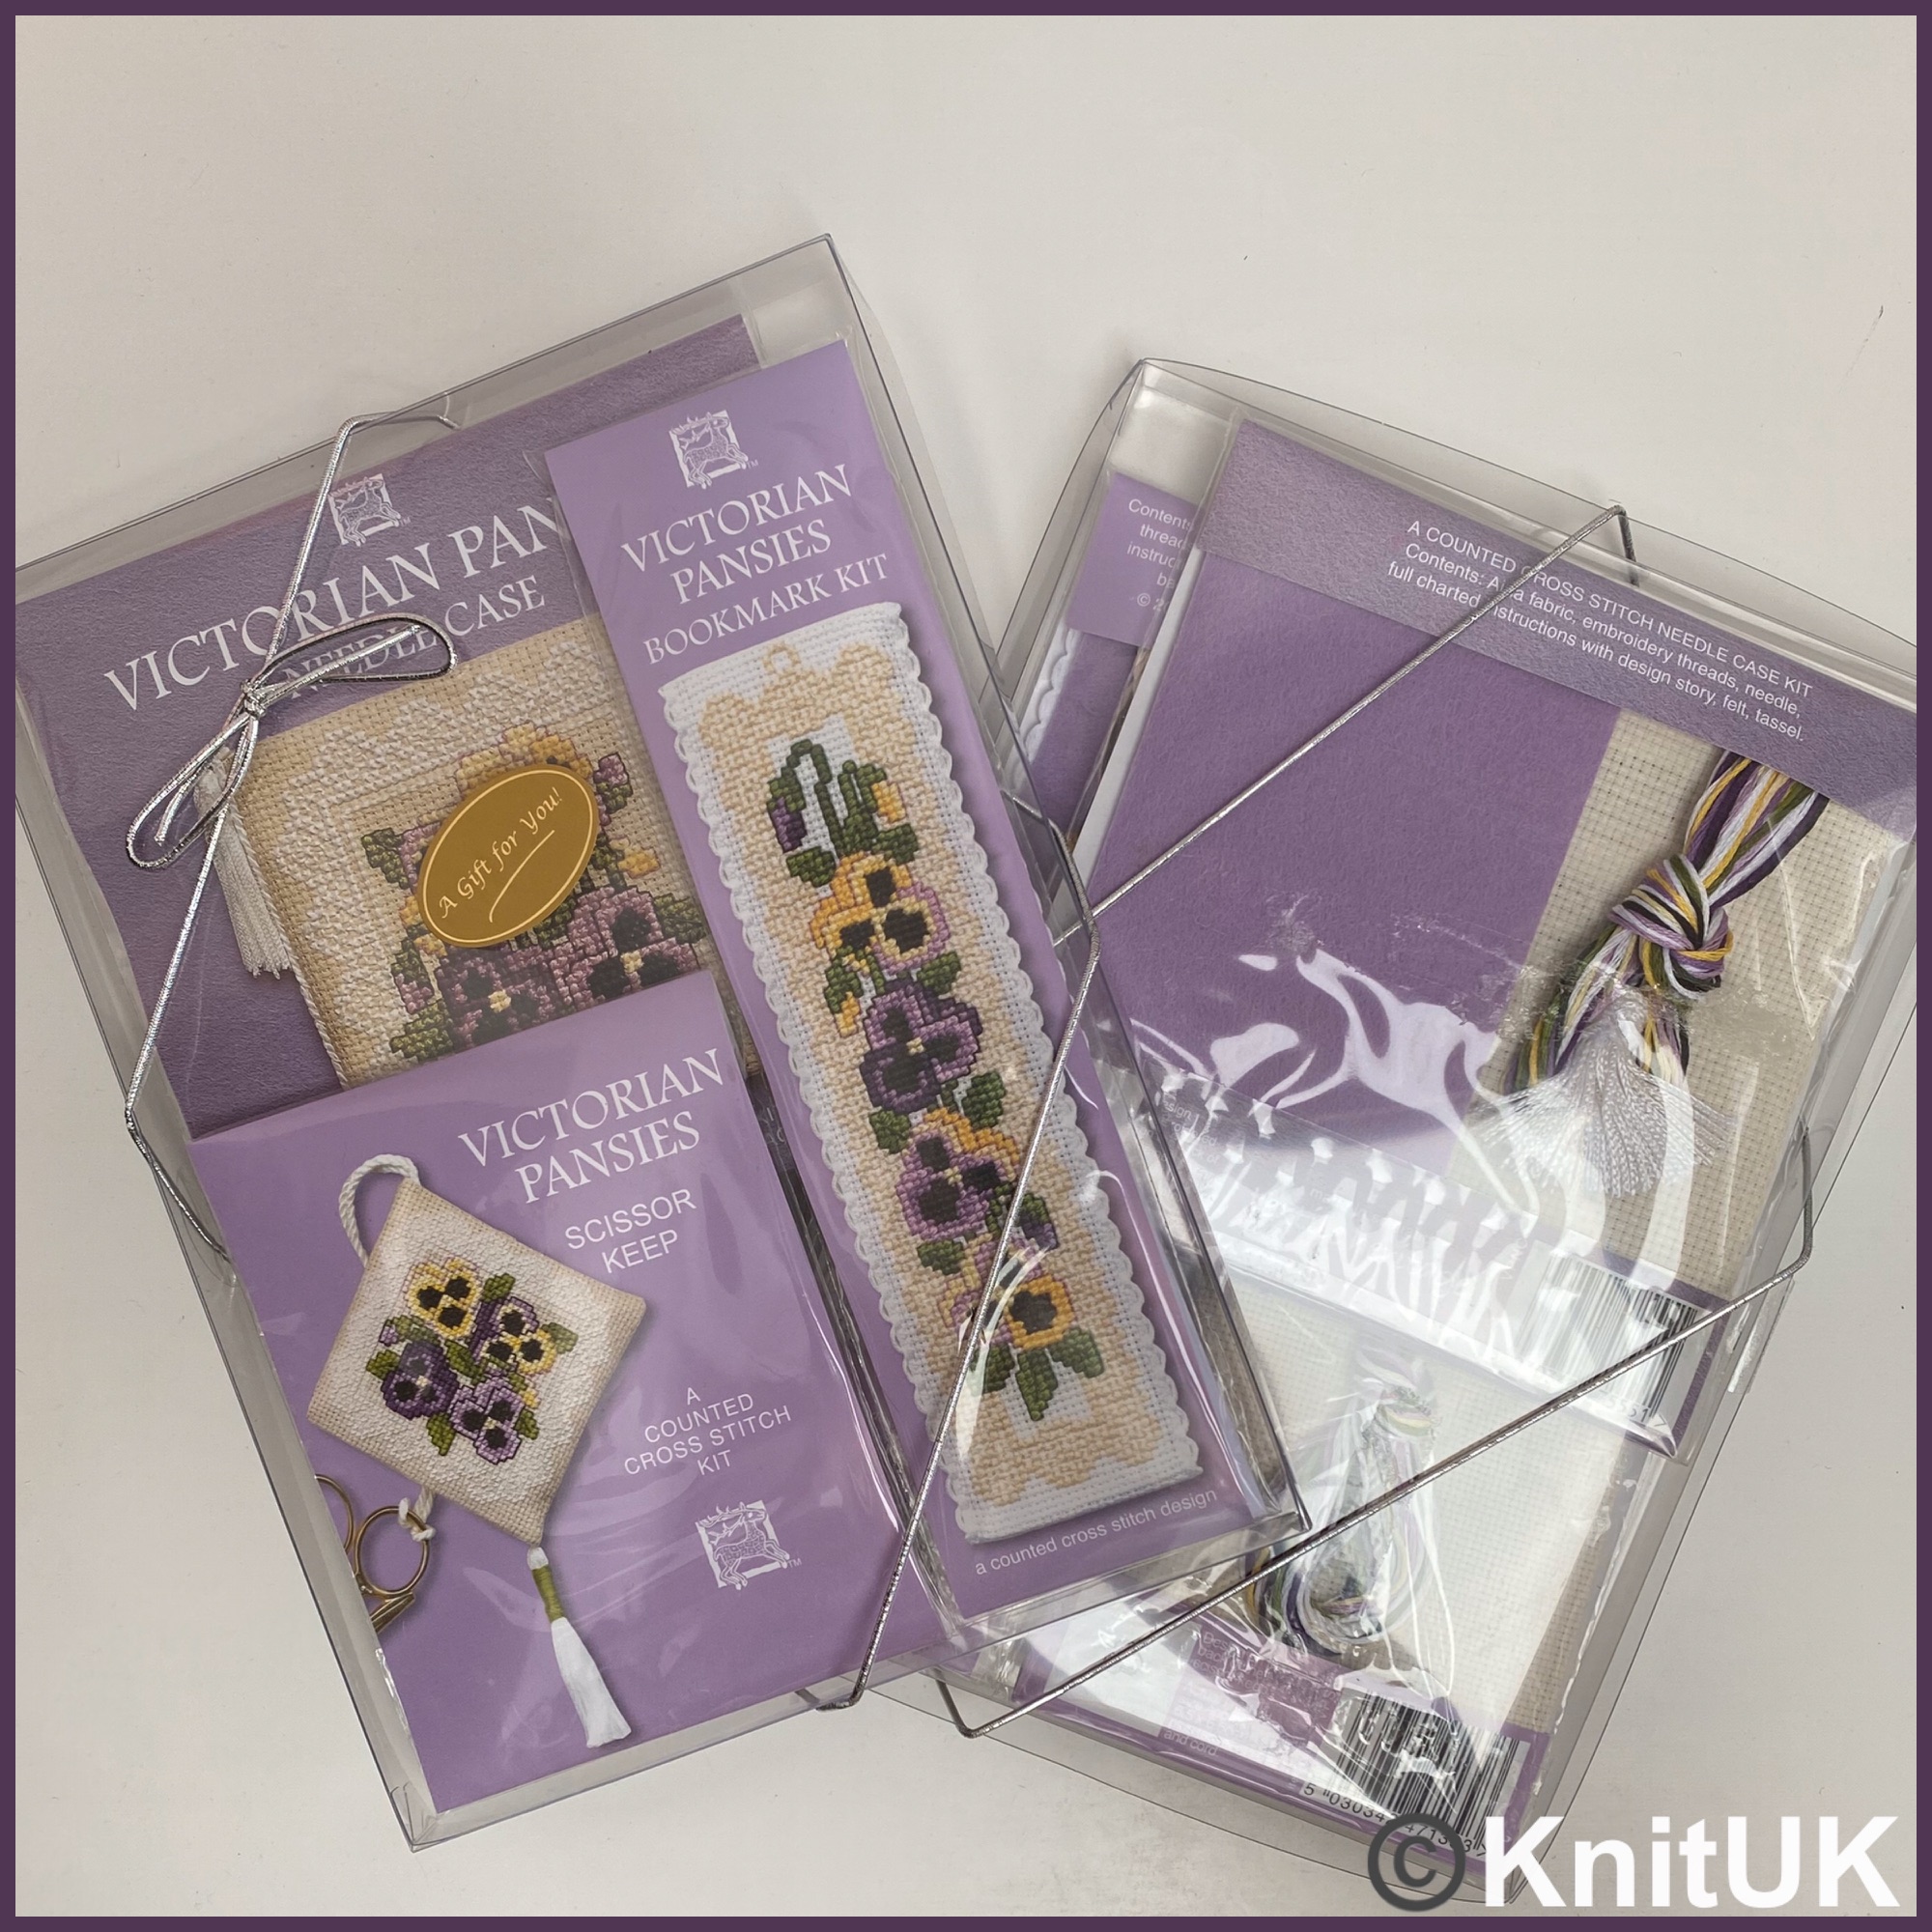 Textile Heritage Cross stitch gift pack victorian pansies front back